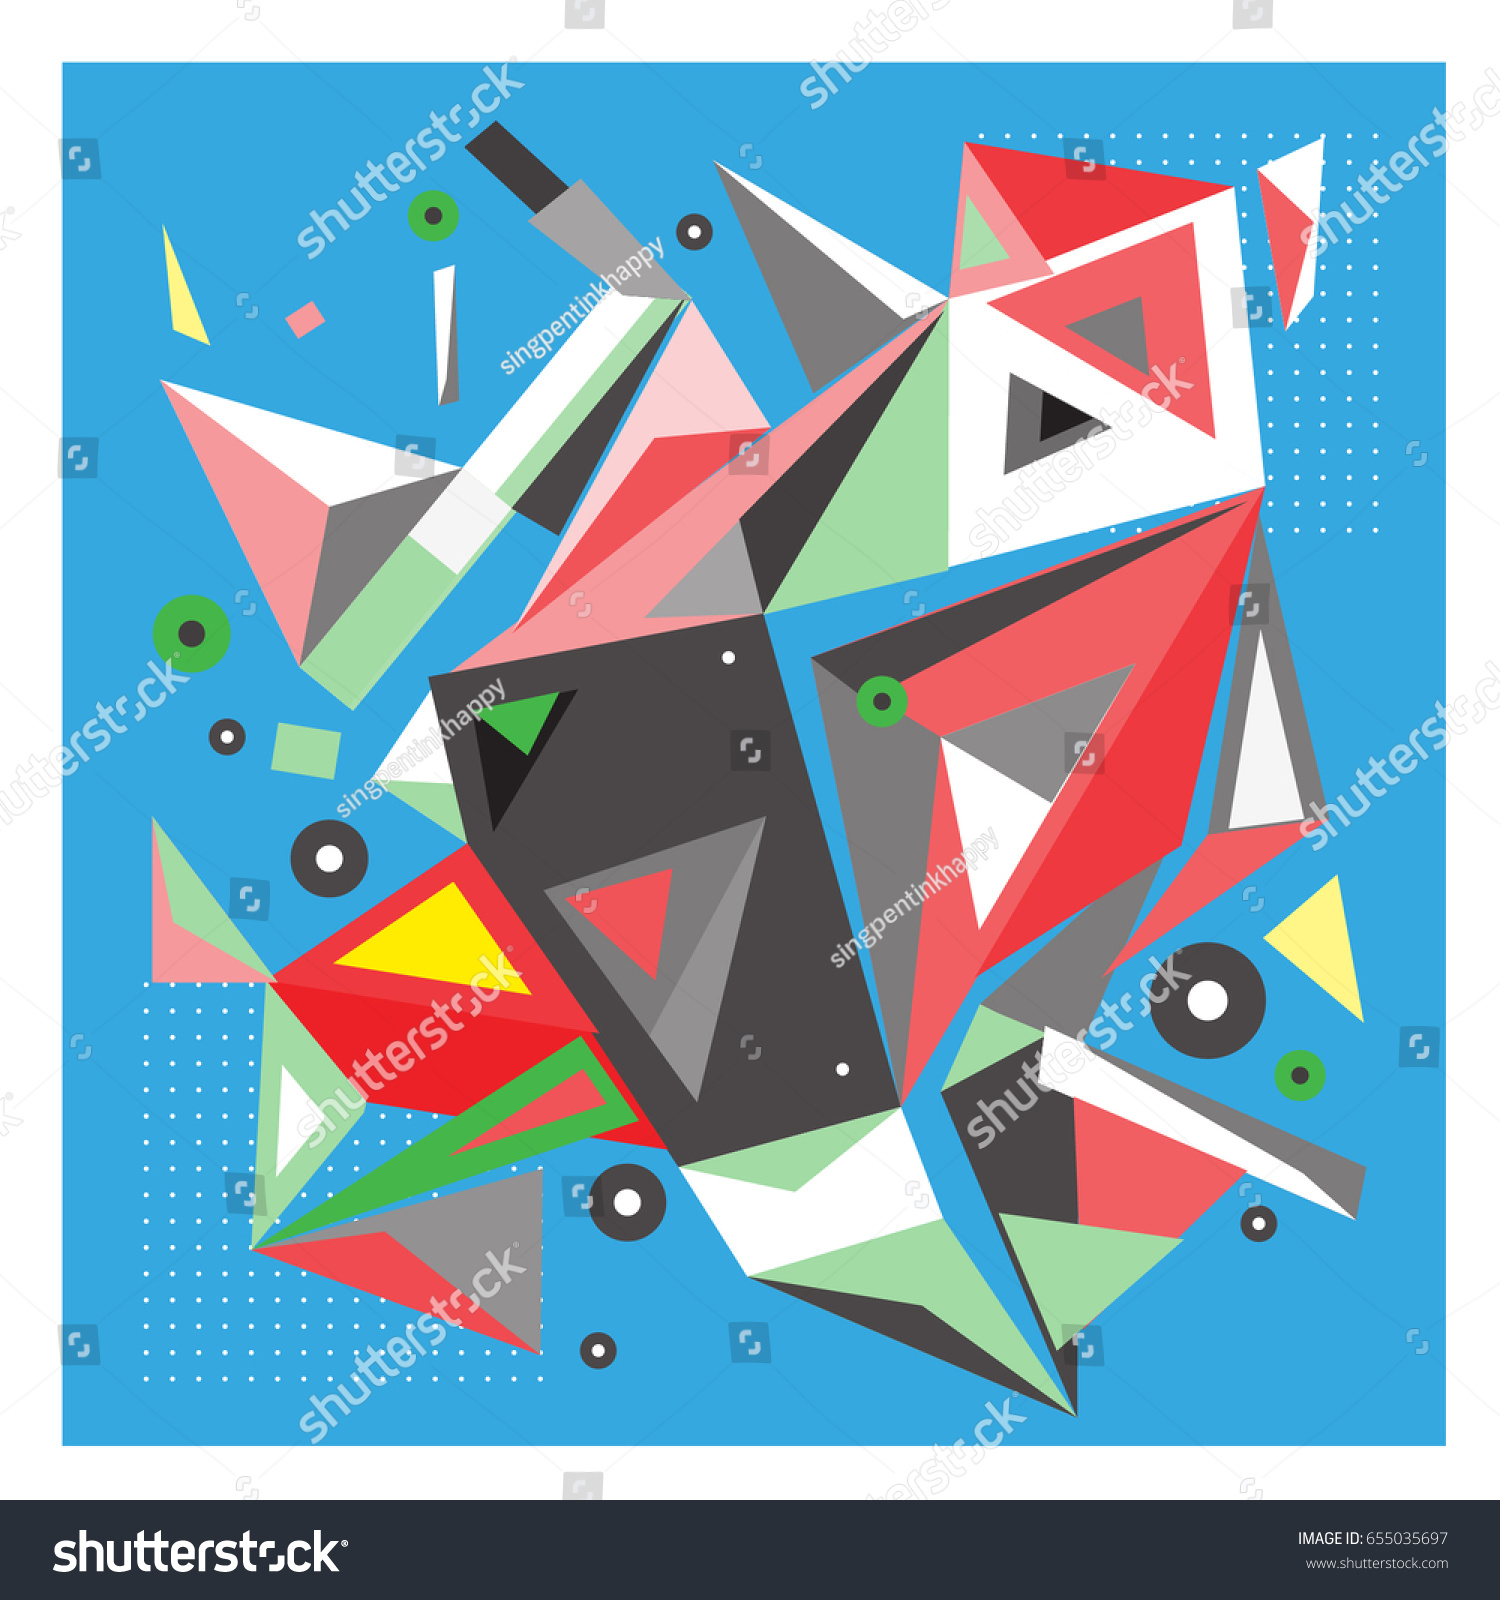 Vector Triangle Geometric 3d Forms Modern Stock Vector (Royalty Free ...